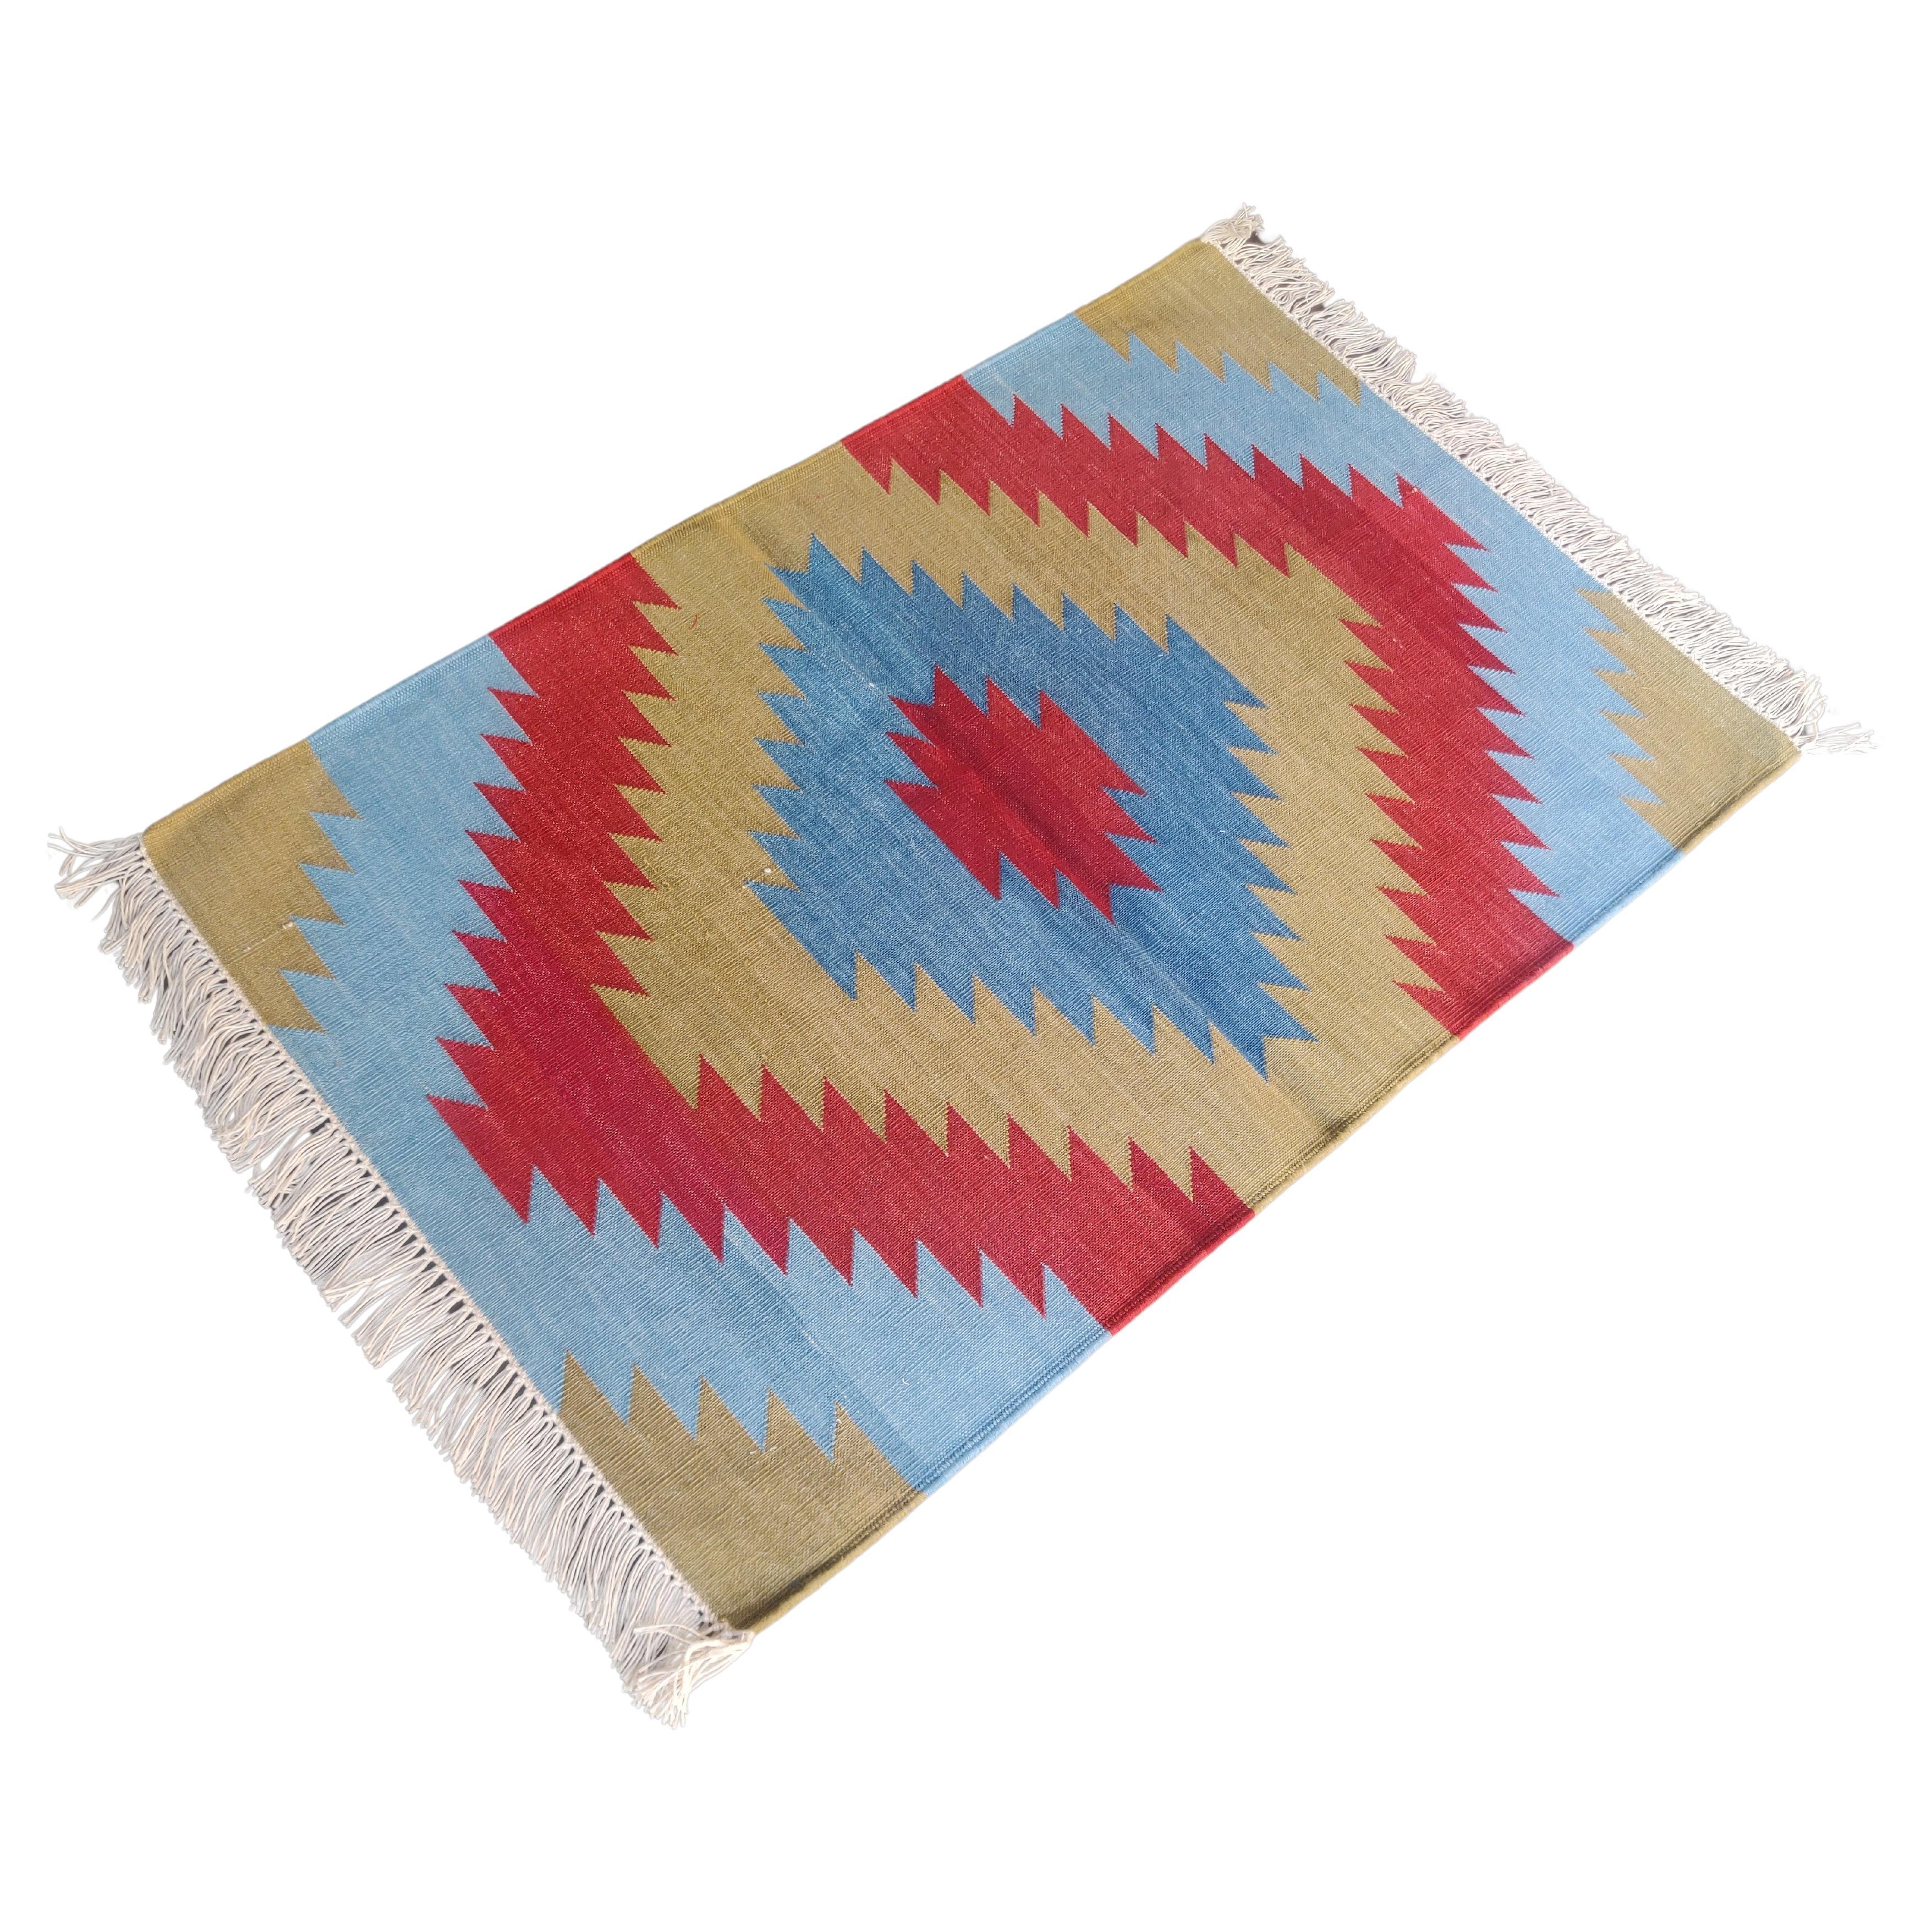 Handmade Cotton Area Flat Weave Rug, 2x3 Red And Blue Geometric Indian Dhurrie For Sale